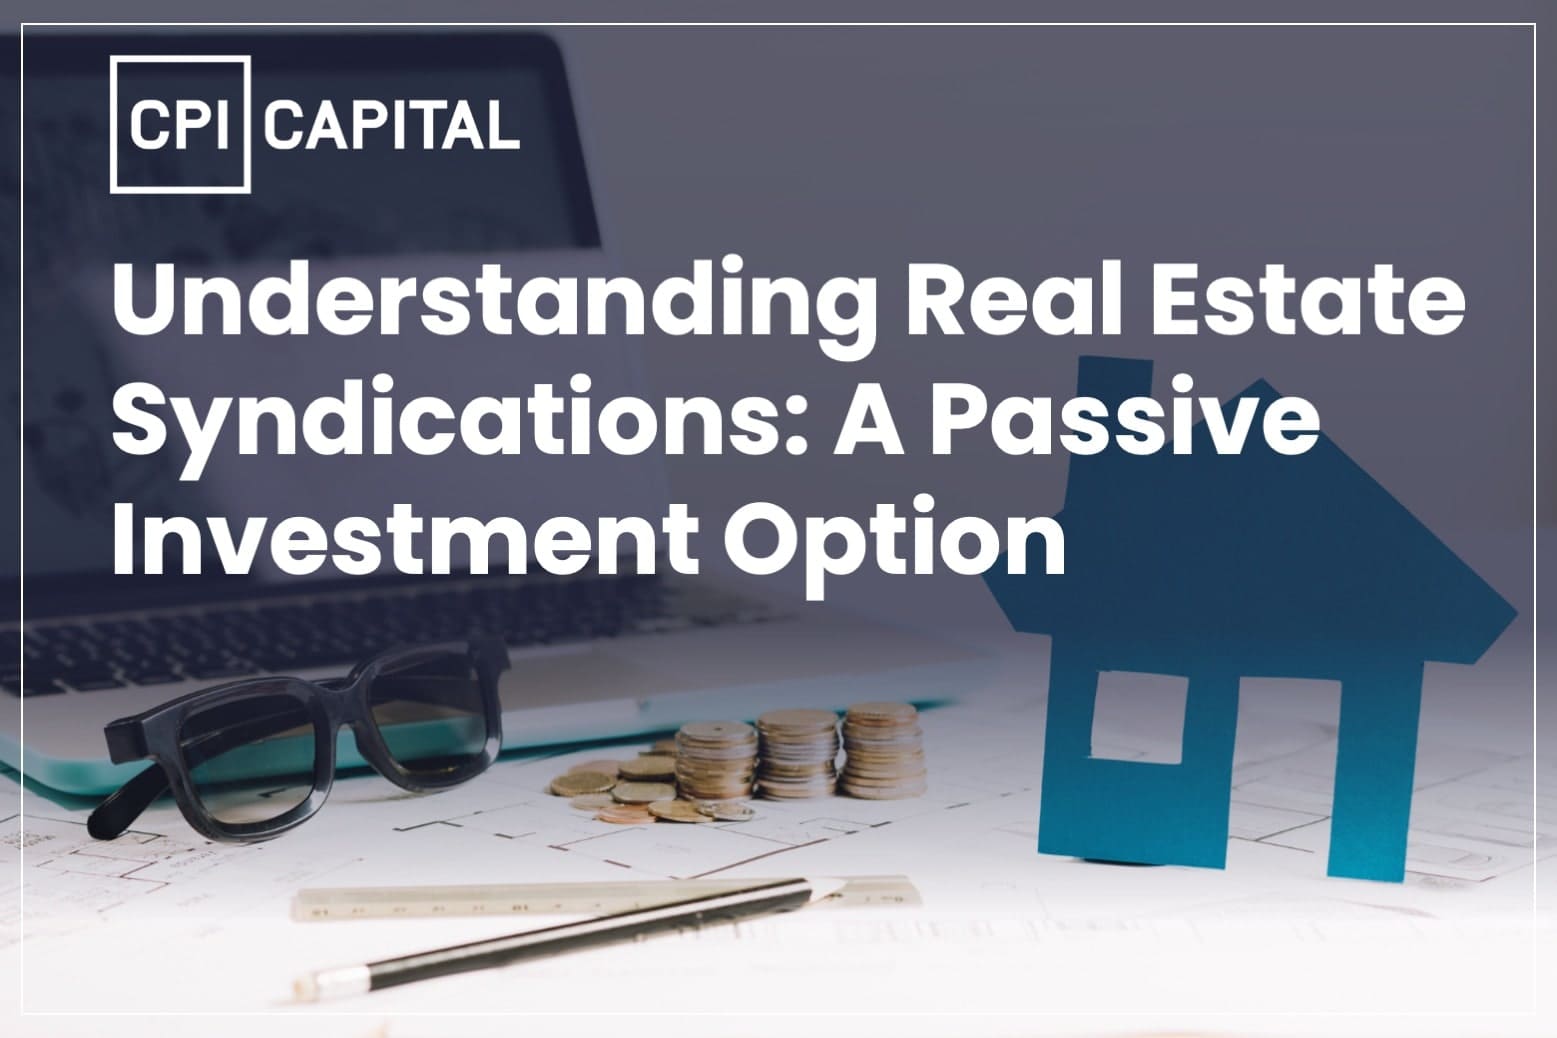 Understanding Real Estate Syndications: A Passive Investment Option